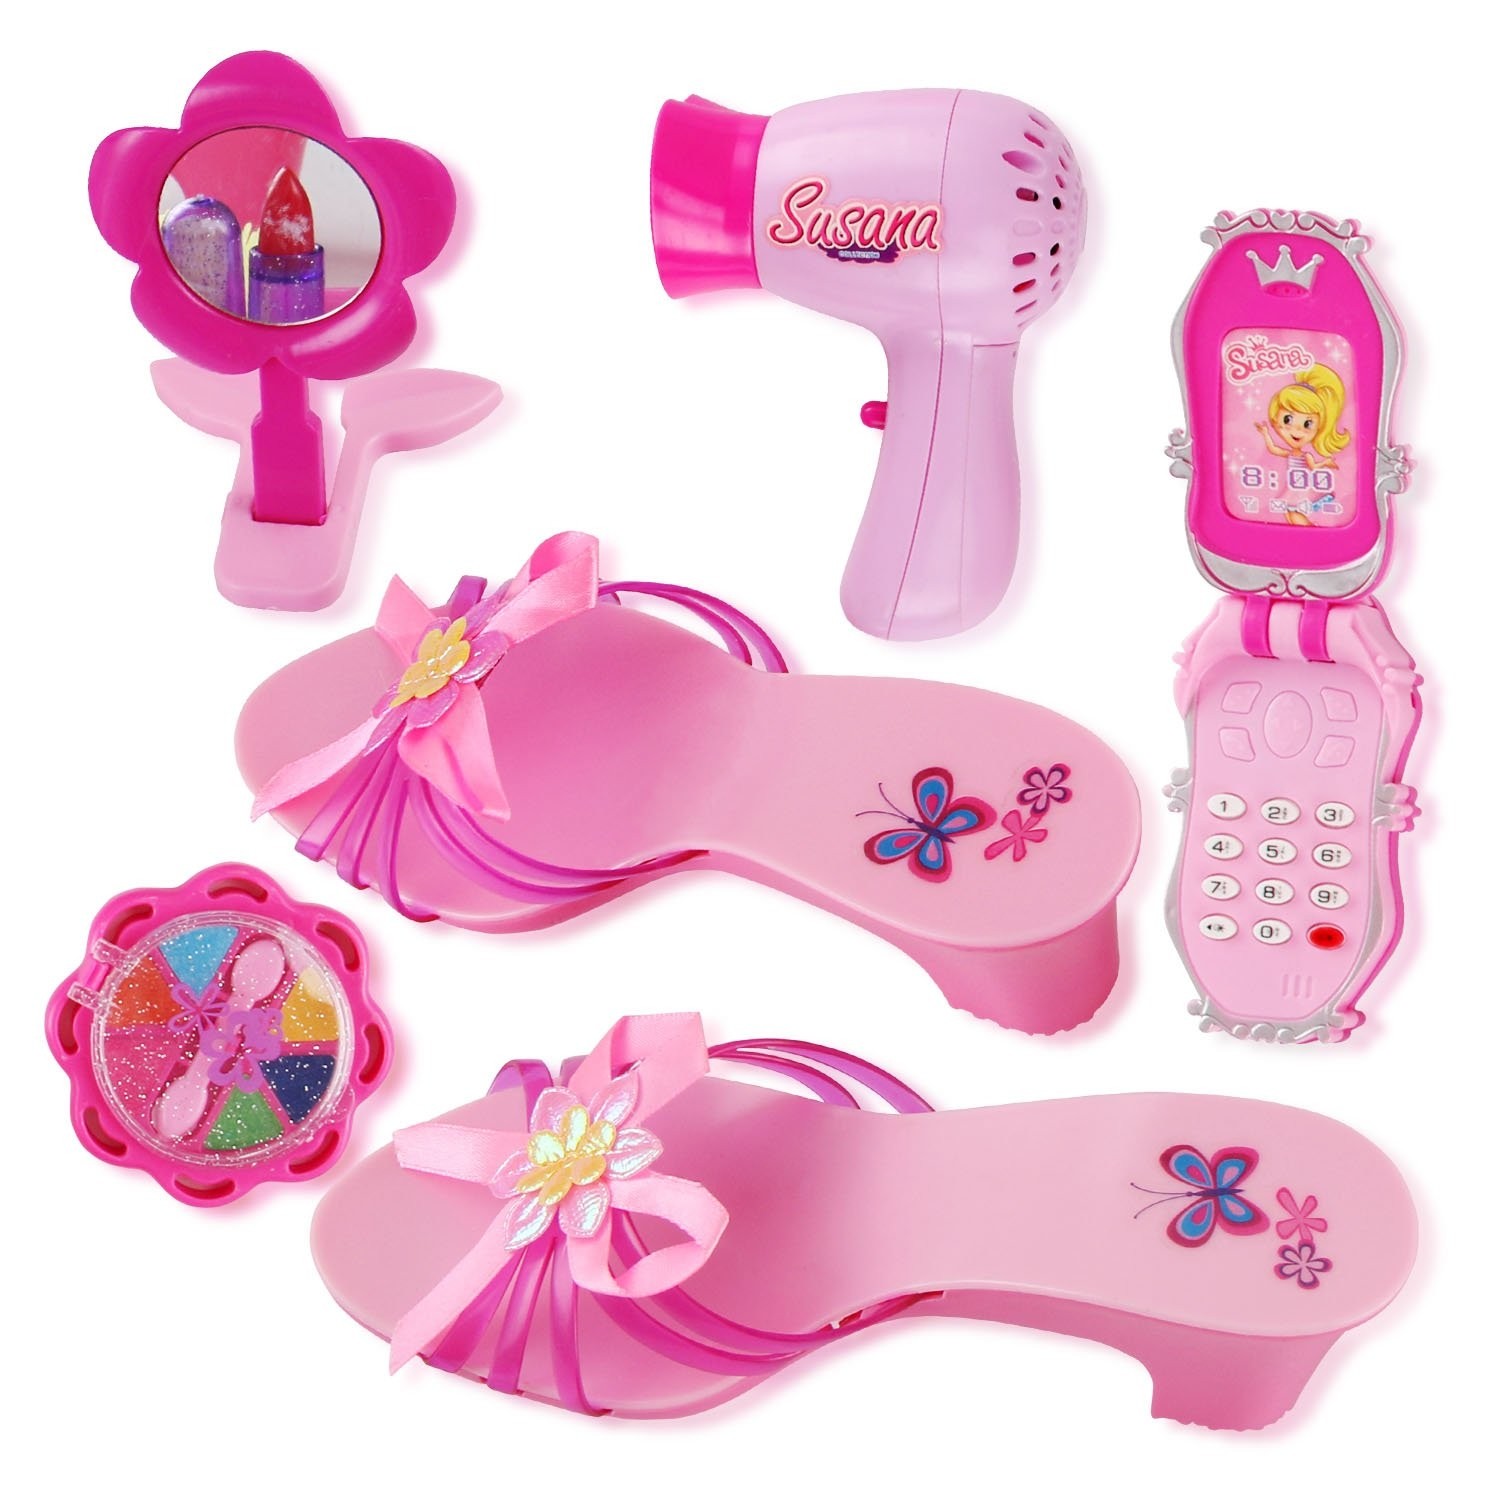 Princess Beauty Play Set With Hair Dryer, Shoes, And Accessories